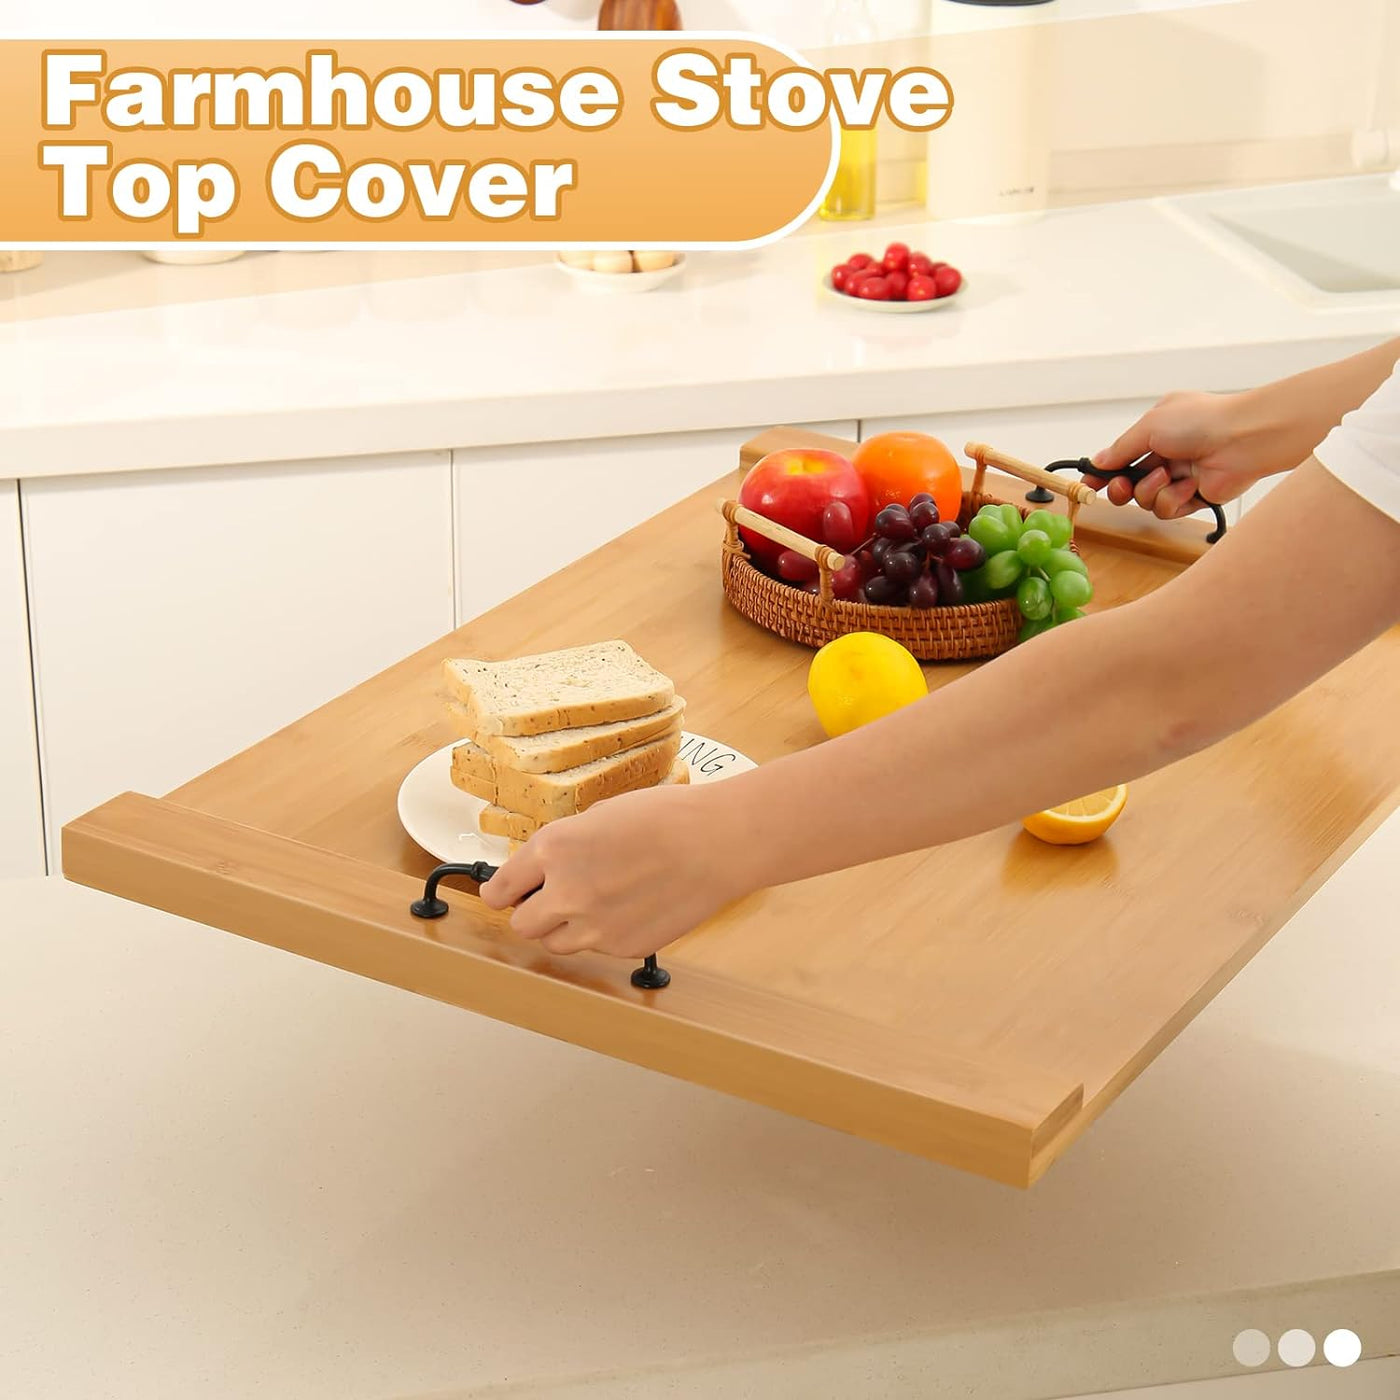 Calmbee Noodle Board Stove Cover - Bamboo Stove Top Cover, Cutting Board  Stove Top Cover Burner Cover Stove Covers for Gas Stove, Electric Stove  Top